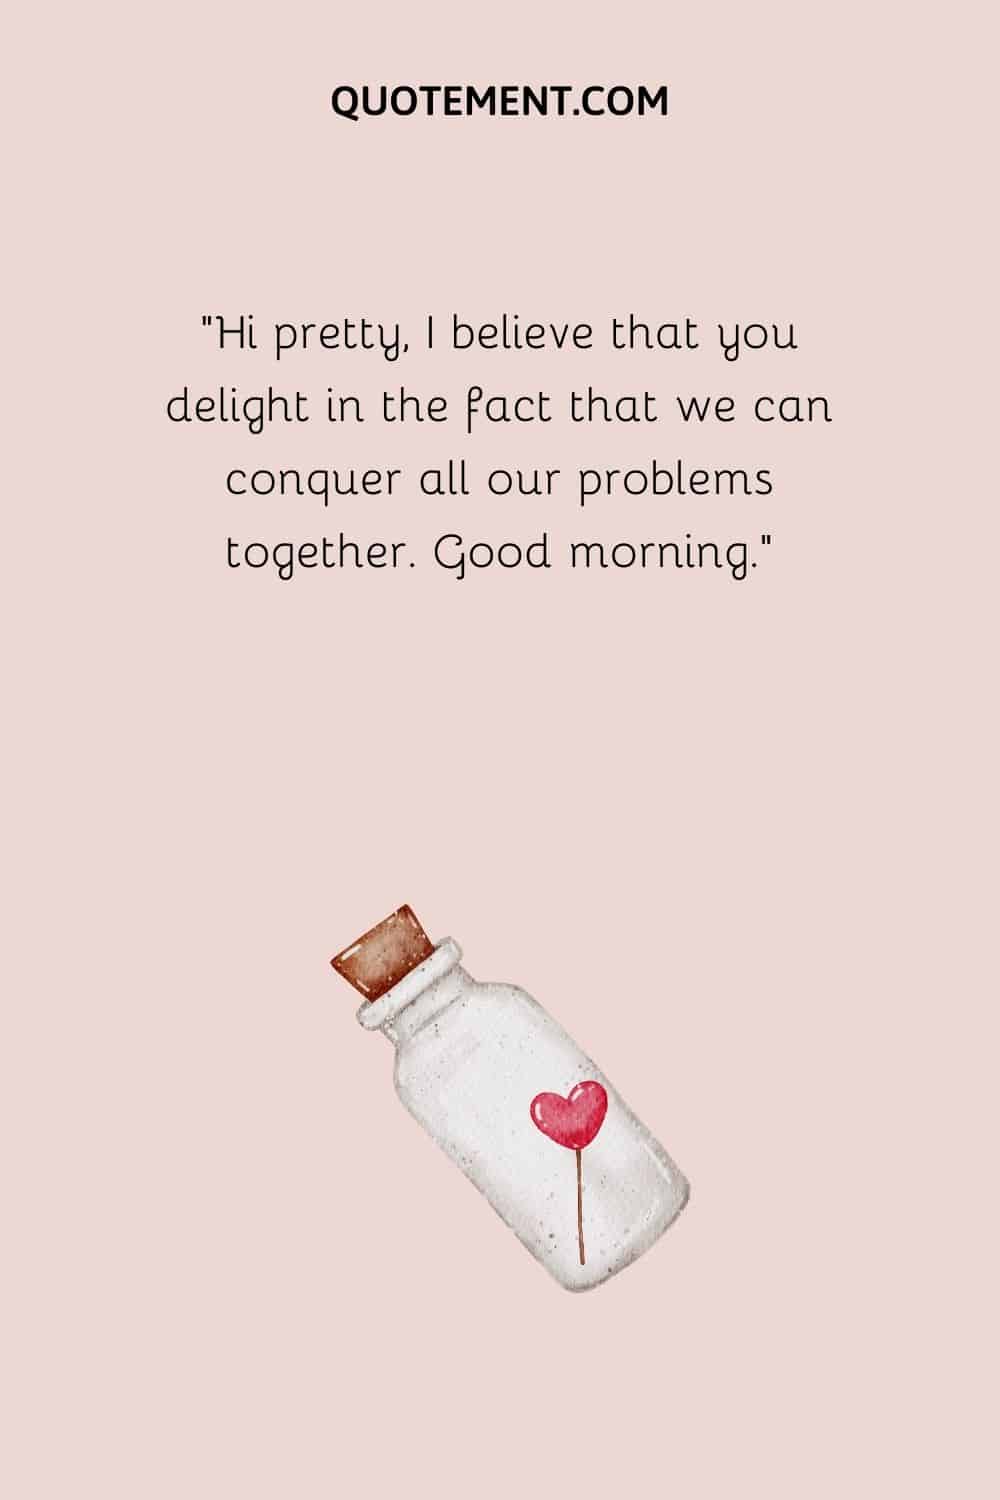 Hi pretty, I believe that you delight in the fact that we can conquer all our problems together. Good morning.